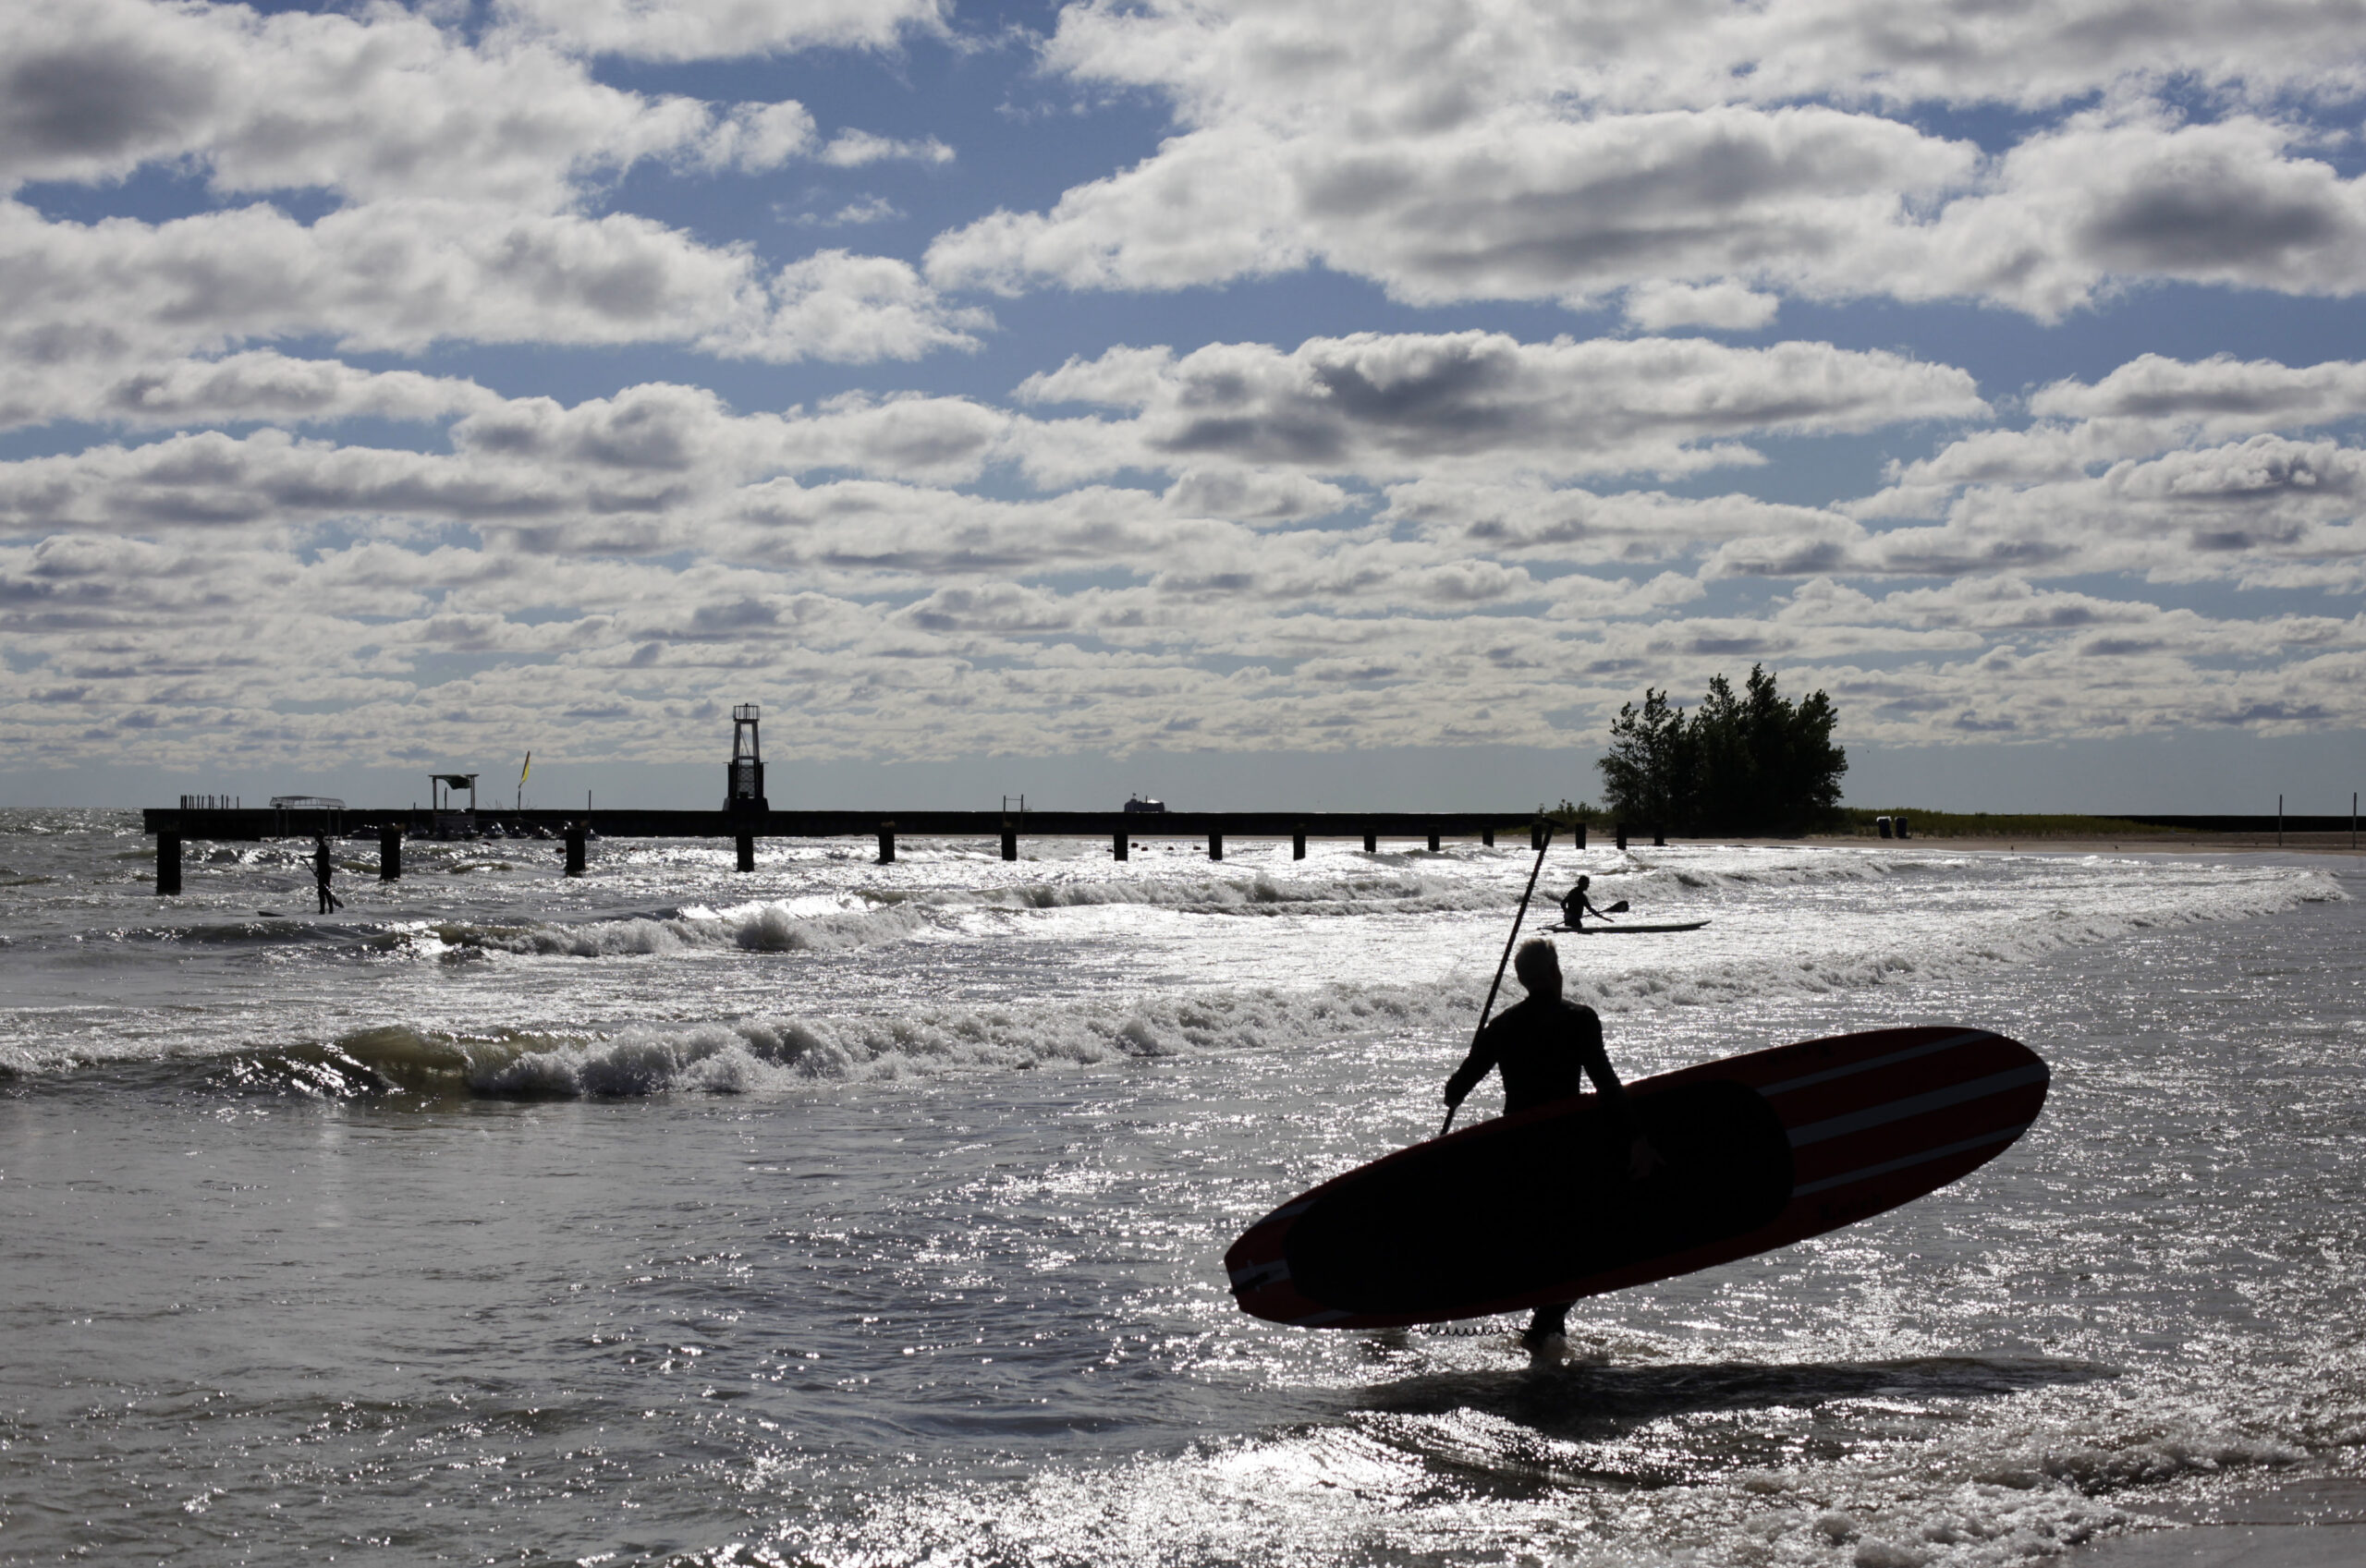 Paddle boarders try to catch some waves on Lake Michigan